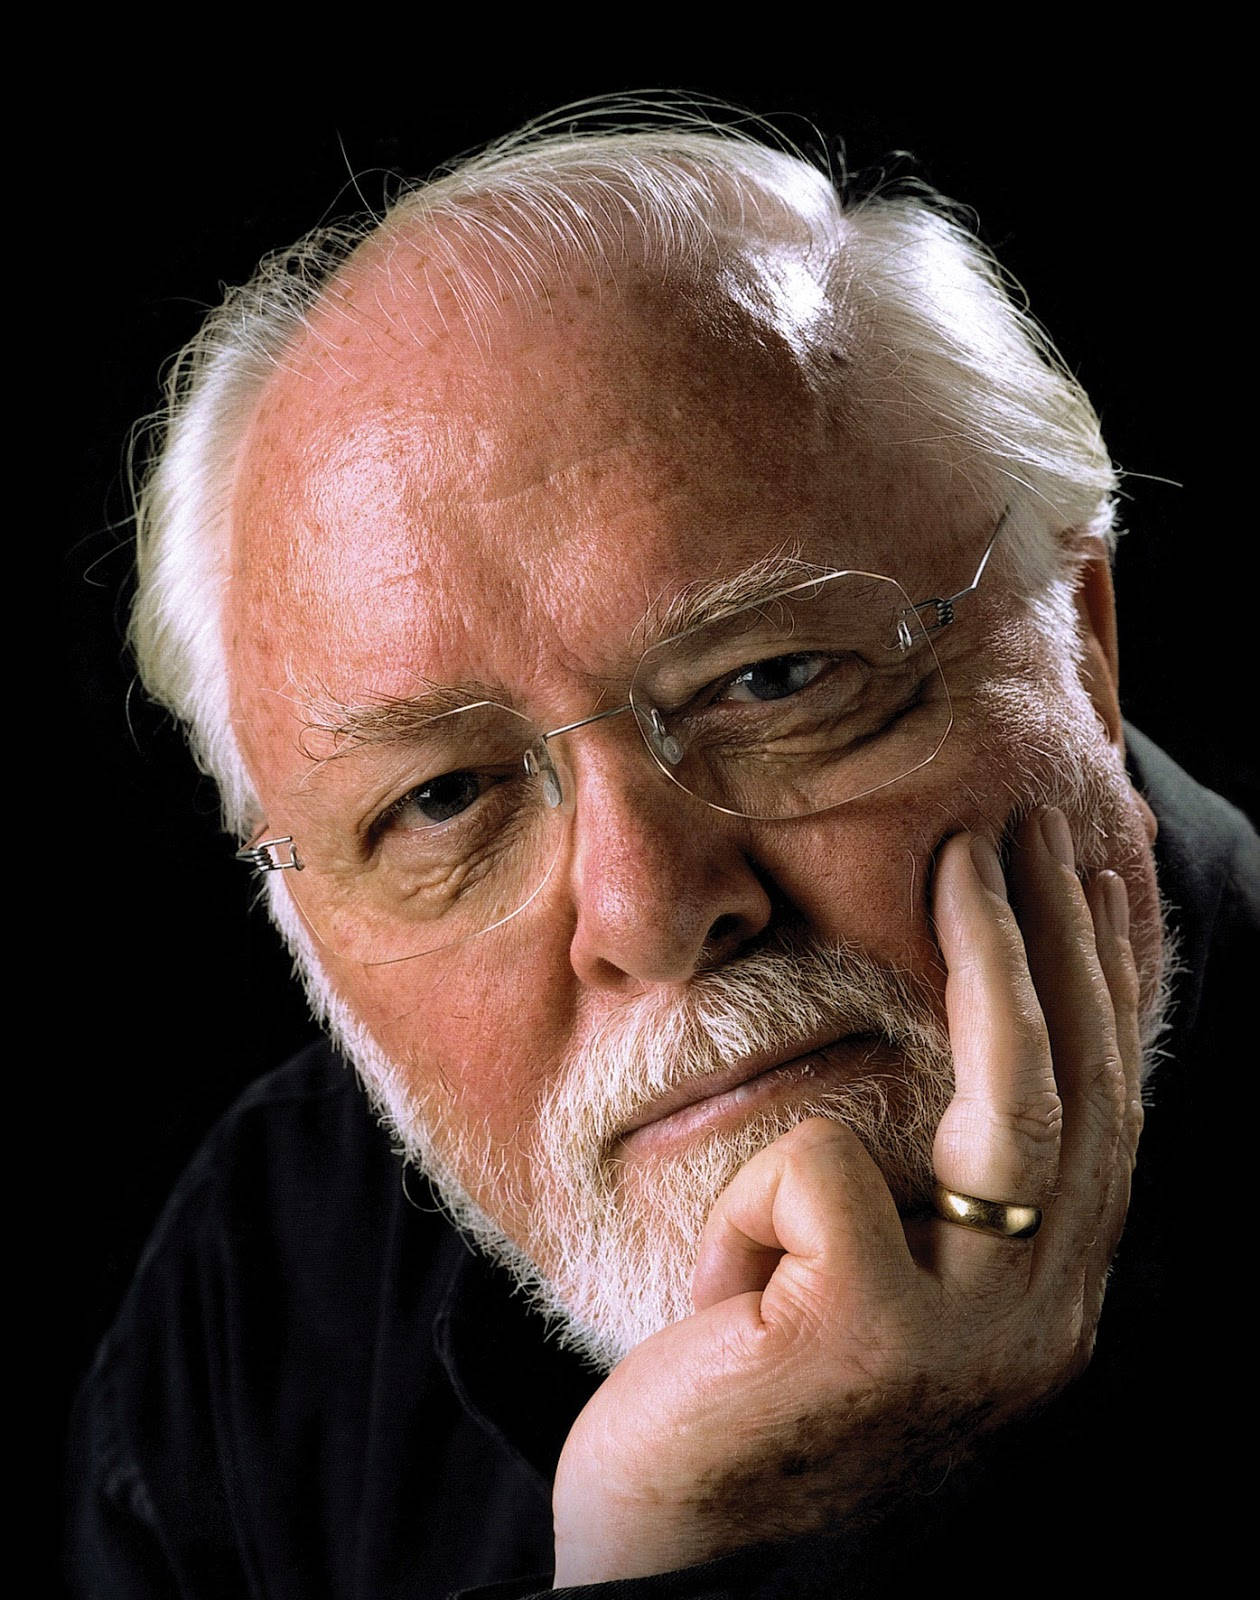 Richardattenborough Med Handen På Hakan. (this Would Be A Caption For A Wallpaper Featuring A Photo Of Richard Attenborough With His Hand On His Chin.) Wallpaper